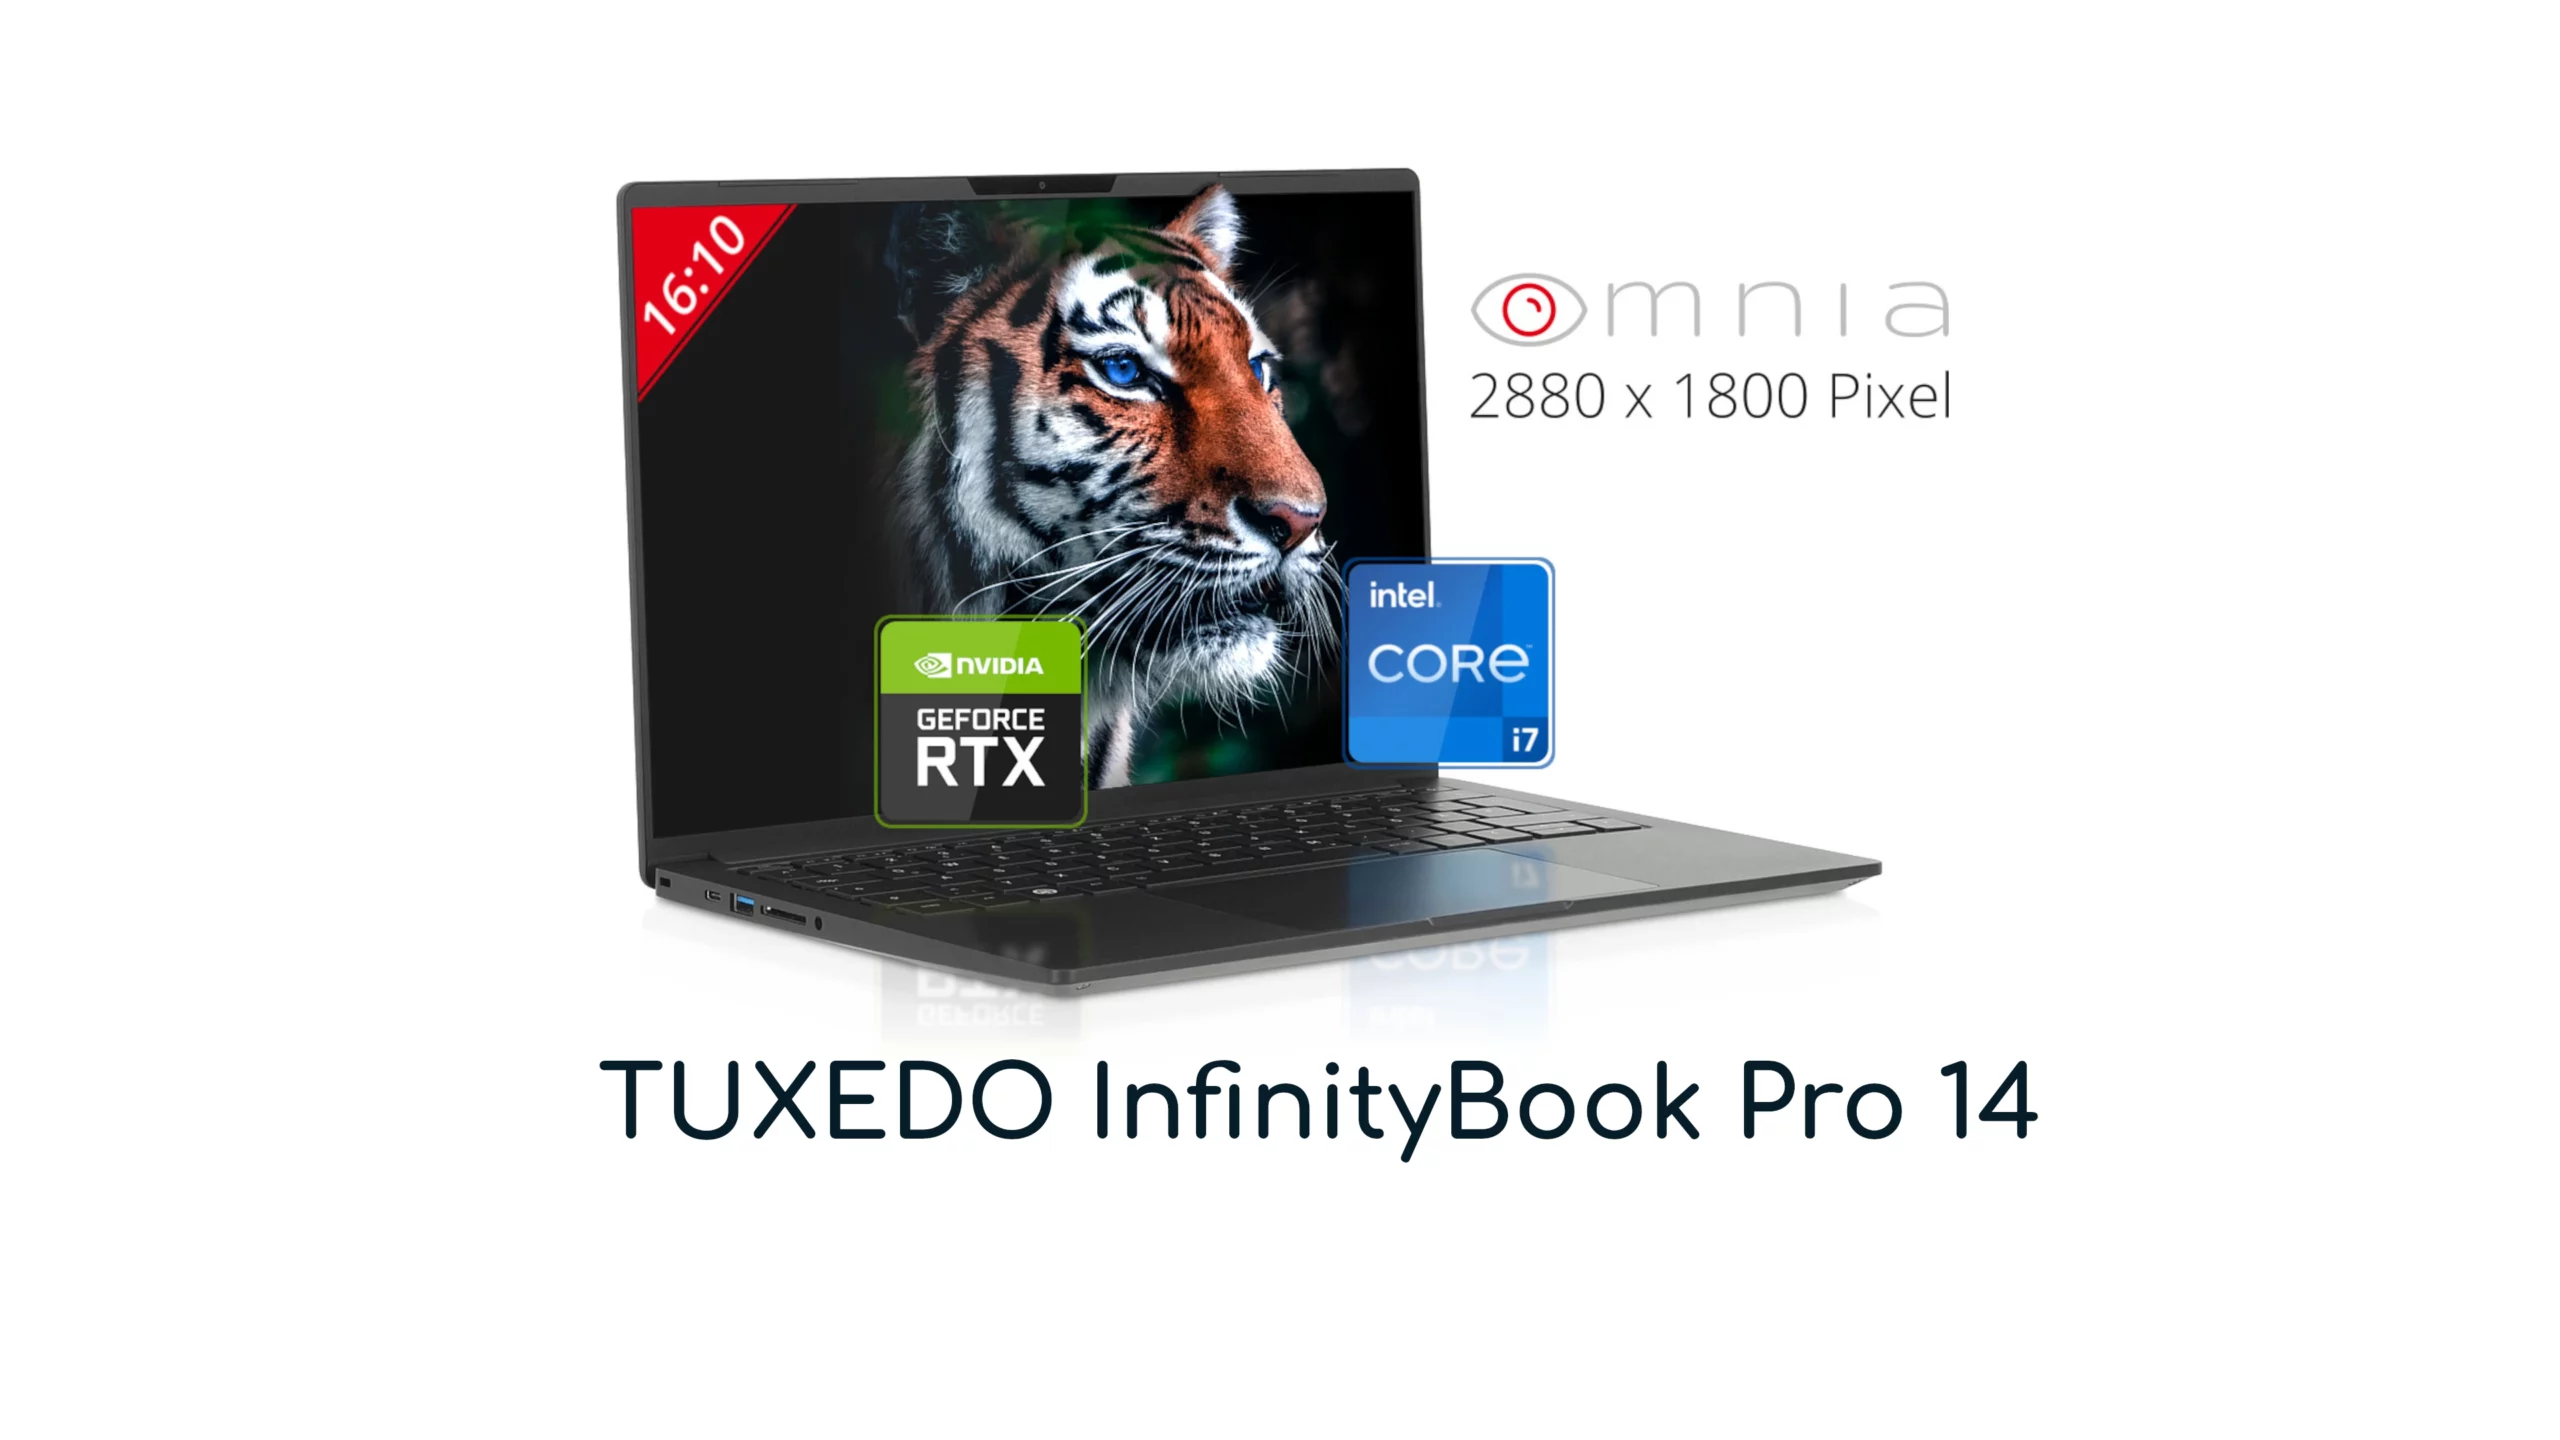 TUXEDO InfinityBook Pro 14 Linux Laptop Updated with NVIDIA RTX 3050 Ti Graphics